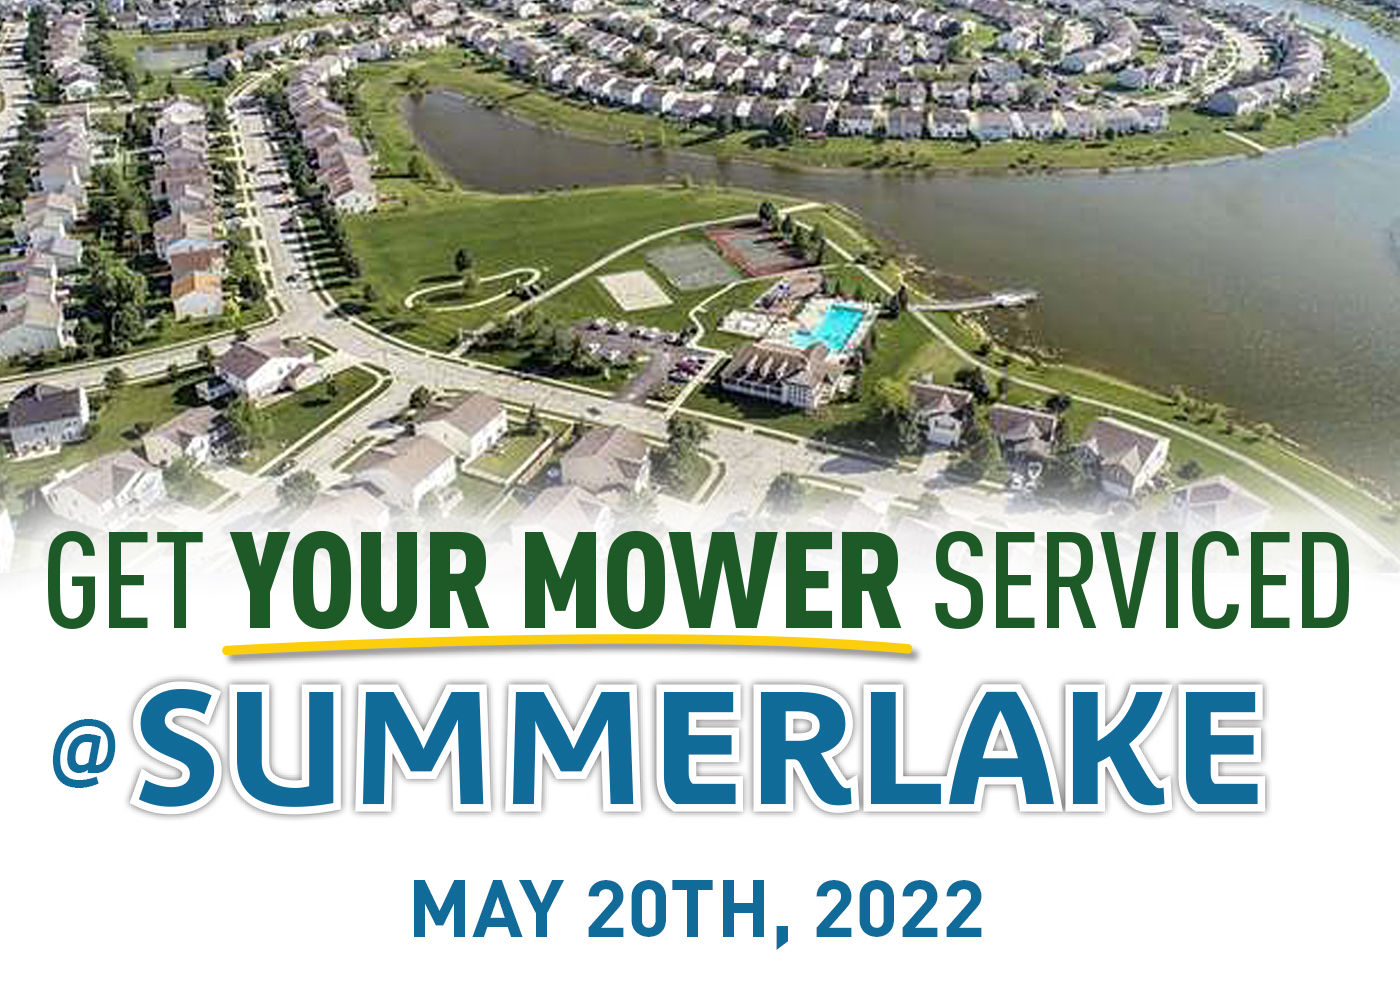 Get Your Mower Serviced at Summerlake